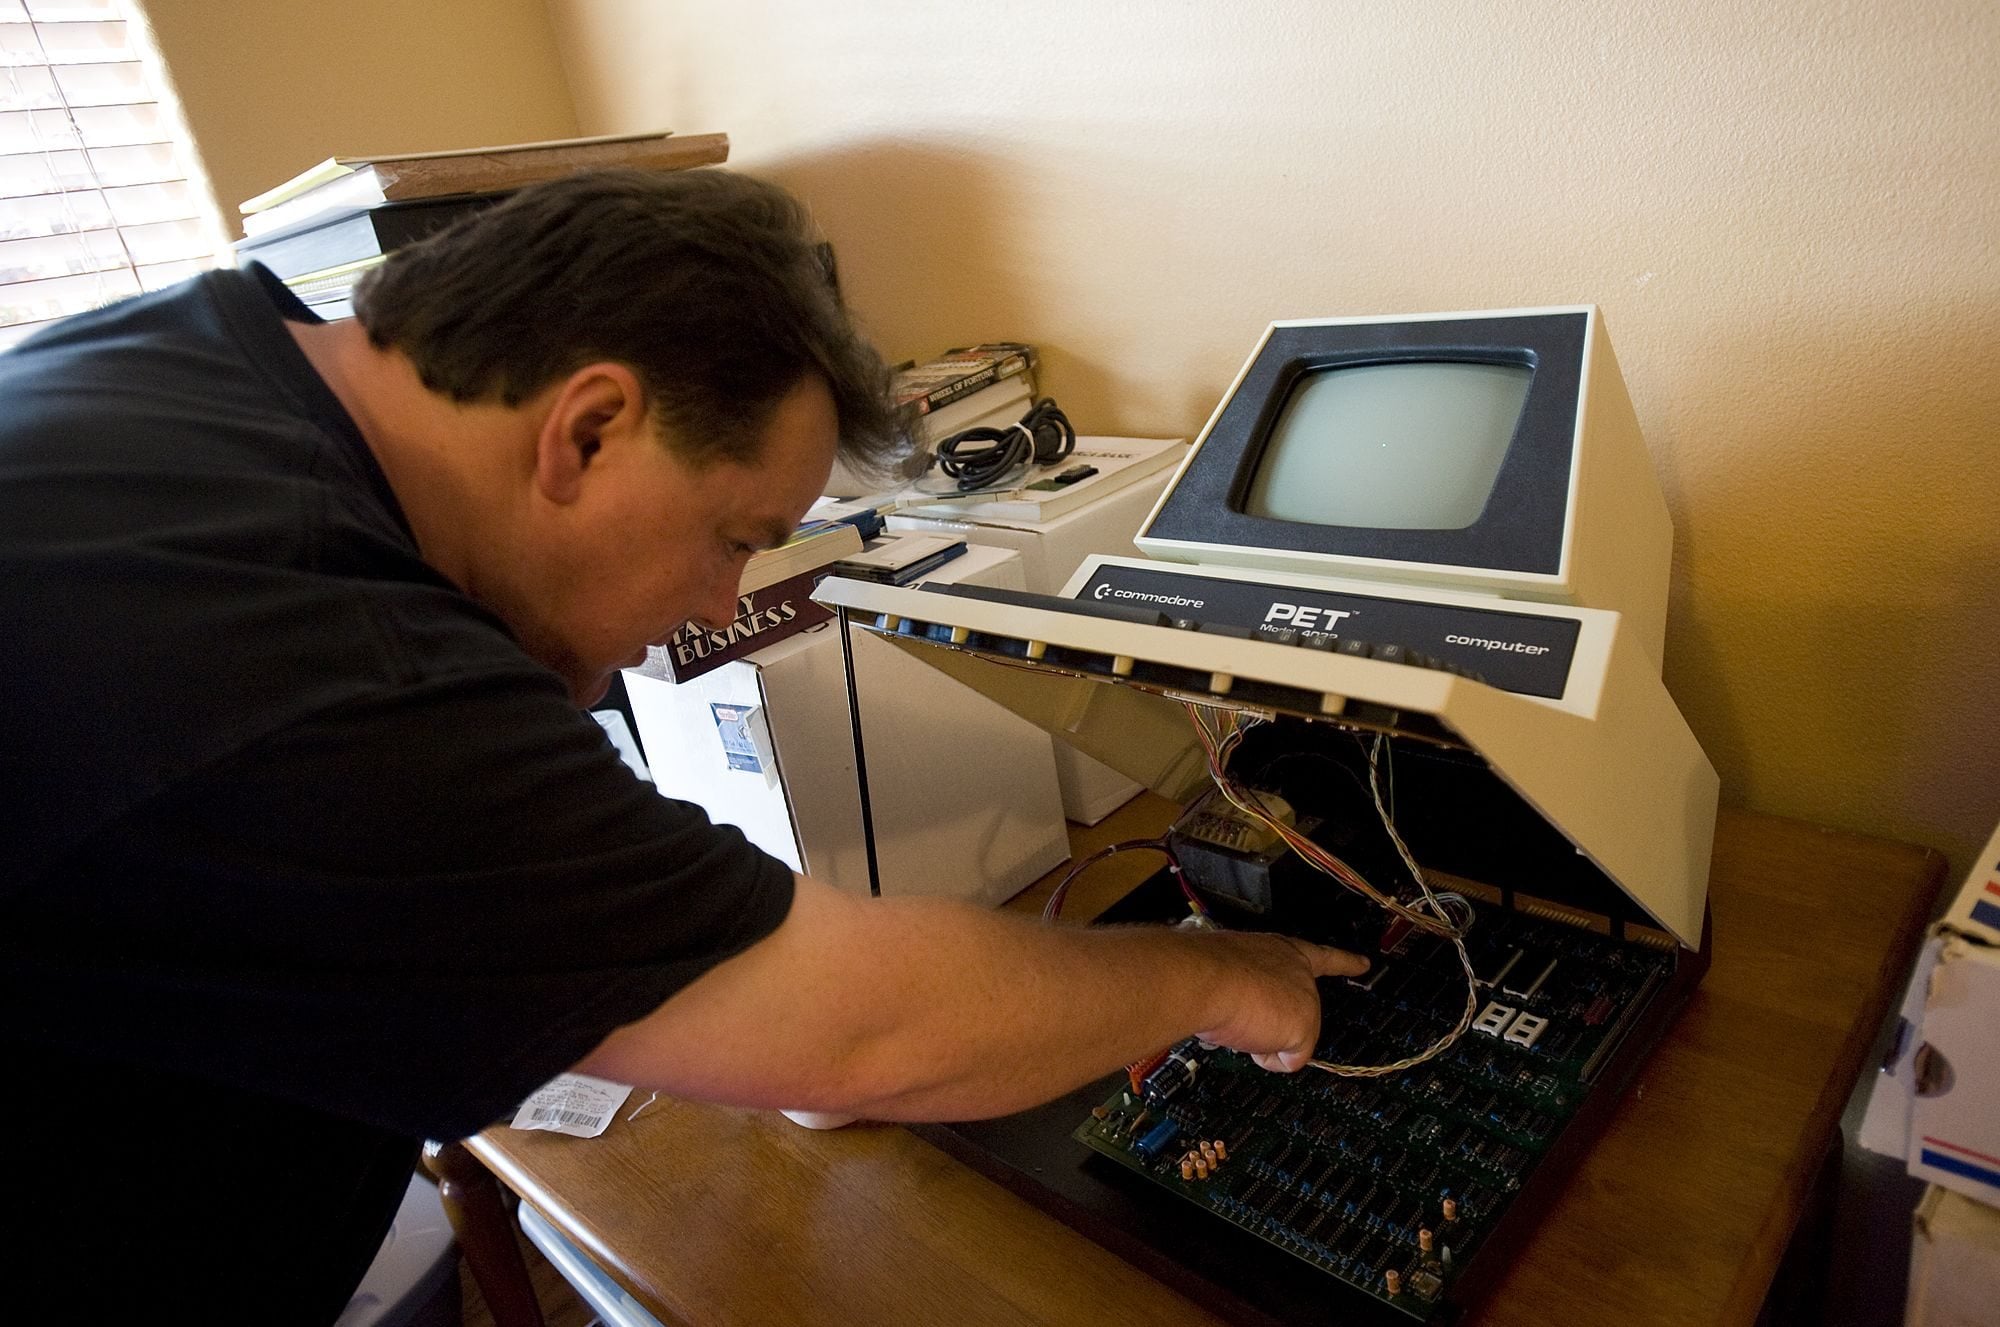 Sean Robinson, founder of the Commodore Computer Club, restored this old Commodore PET computer.